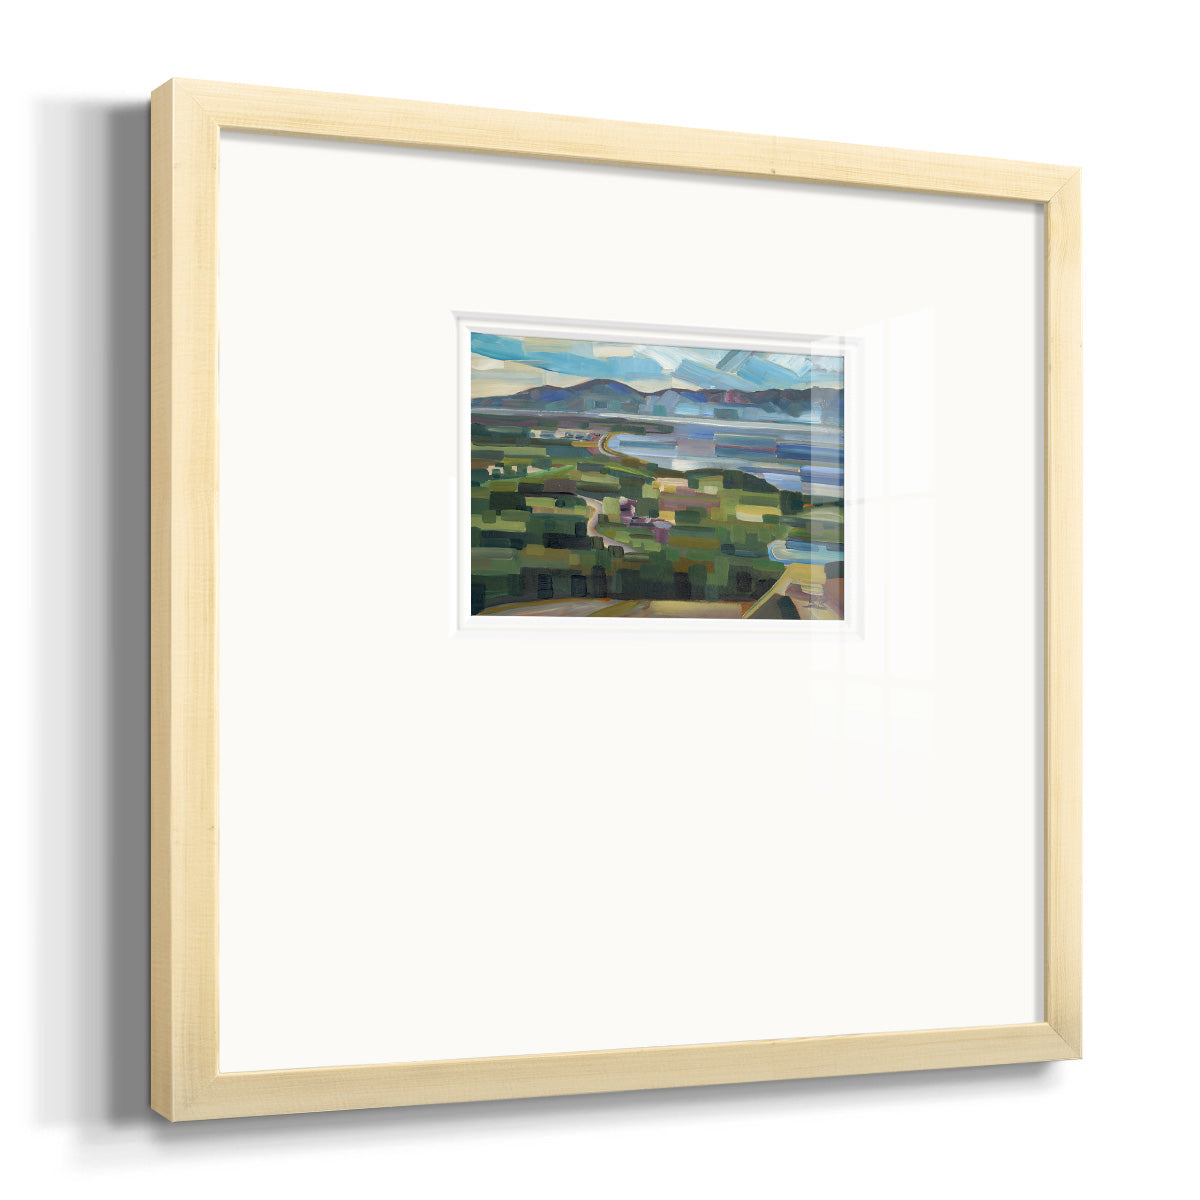 View From Goose Park- Premium Framed Print Double Matboard